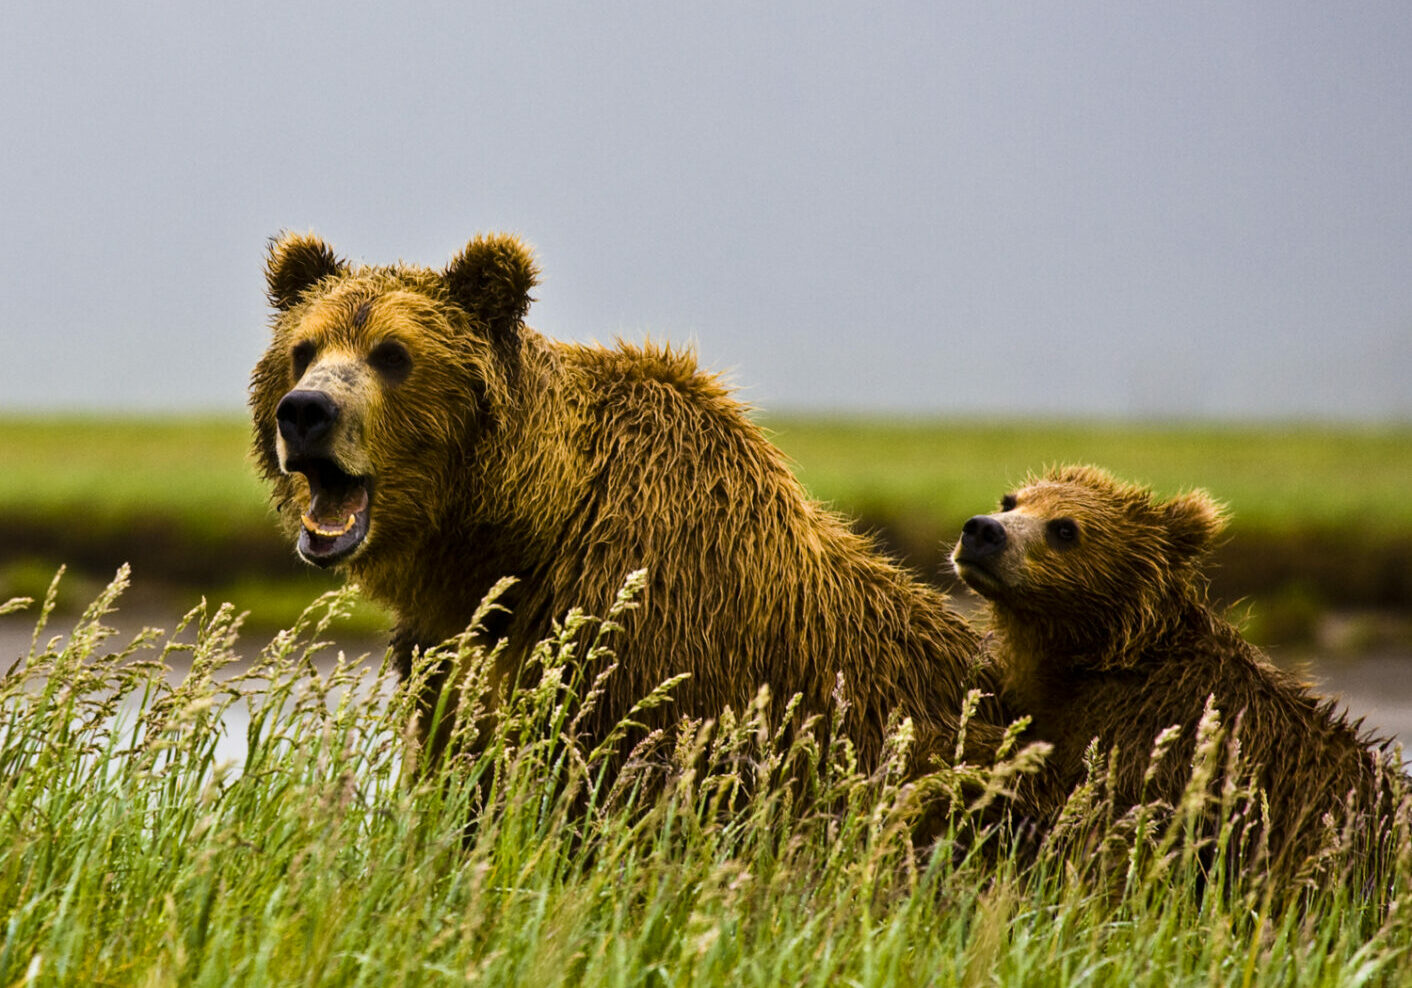 A bear and its cub in the grass.